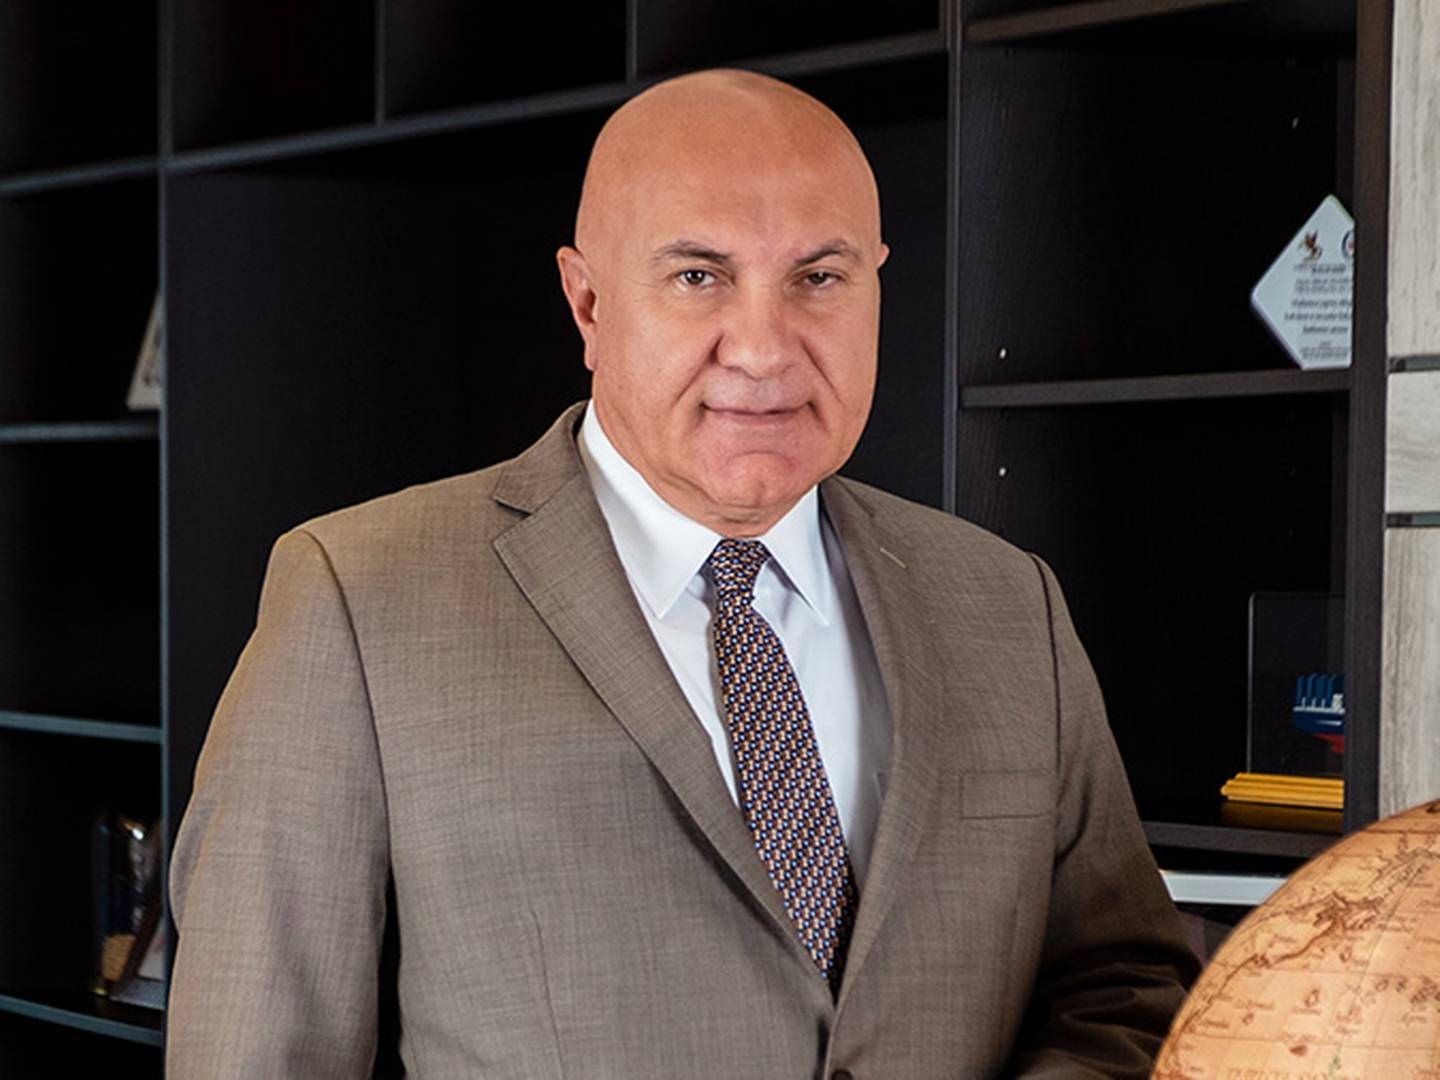 ”I went to CMA as an industrial investor, and although all the risks were there, I knew how to control a worst-case scenario,” says Robert Yildirim about his entry as a major shareholder and rescuer in CMA CGM. | Photo: Yildirim Group